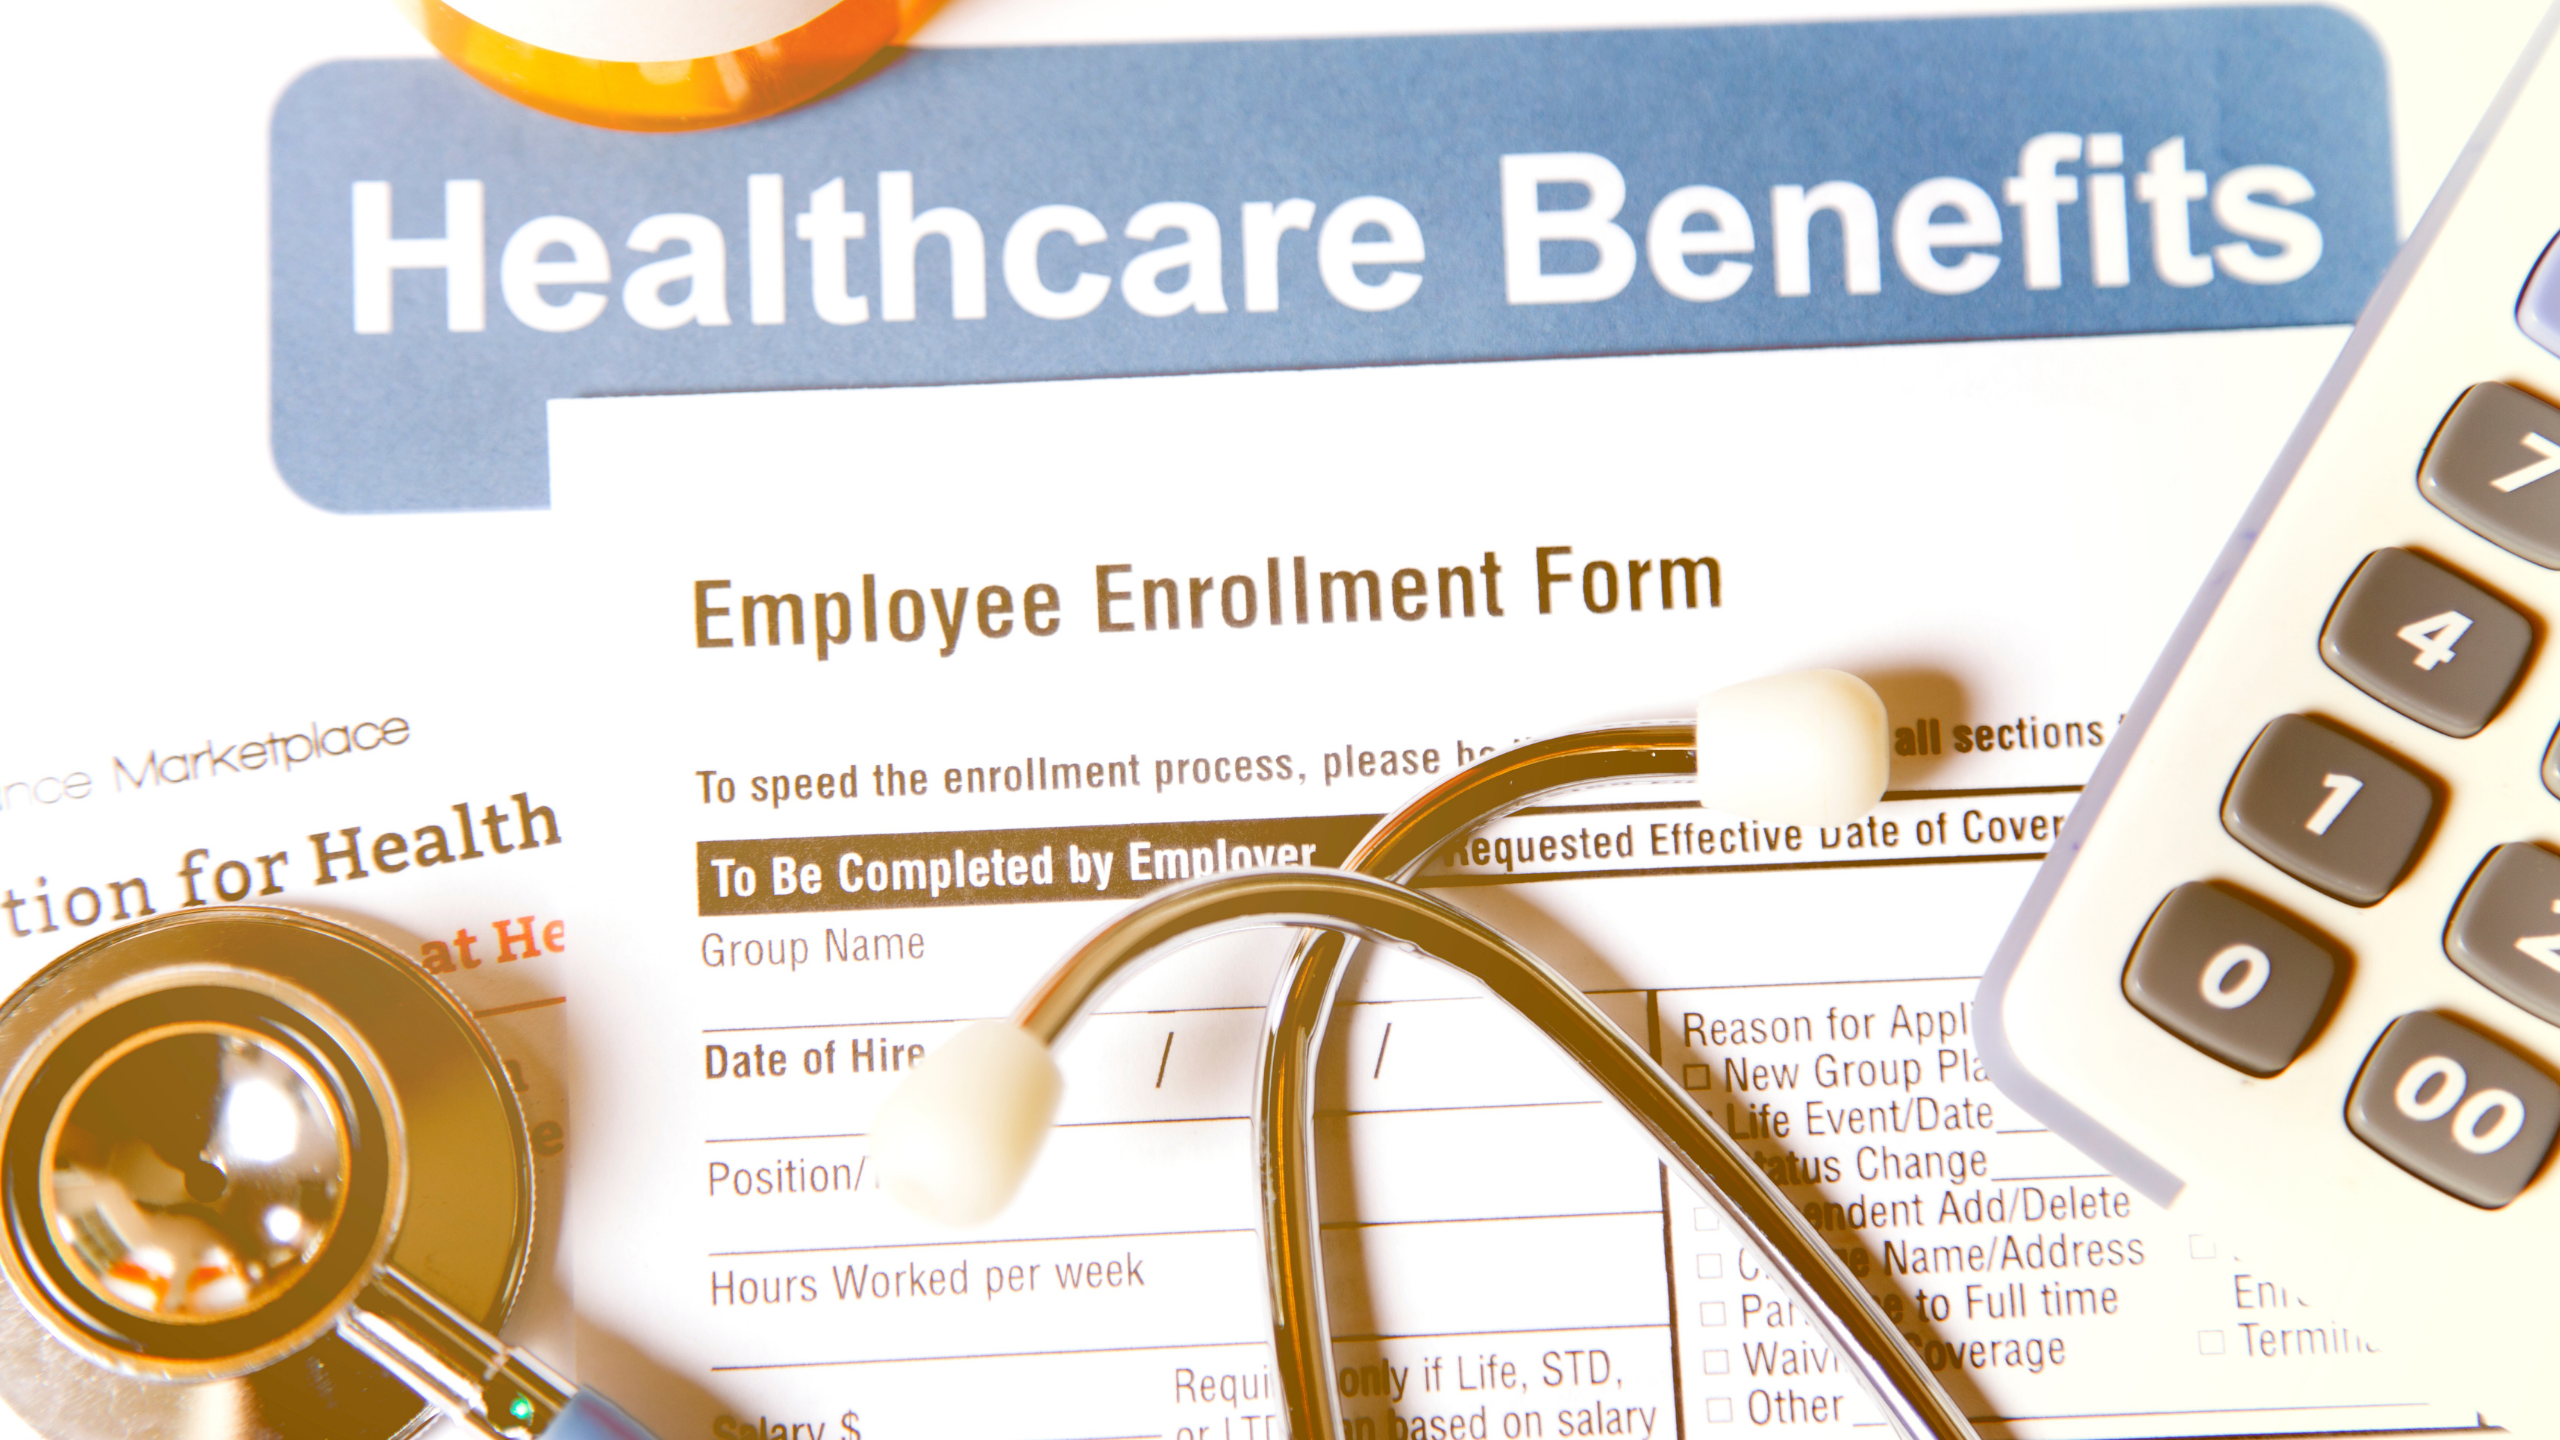 How does the Modified Rule of 75 Impact Health Benefits for AT&T employees?